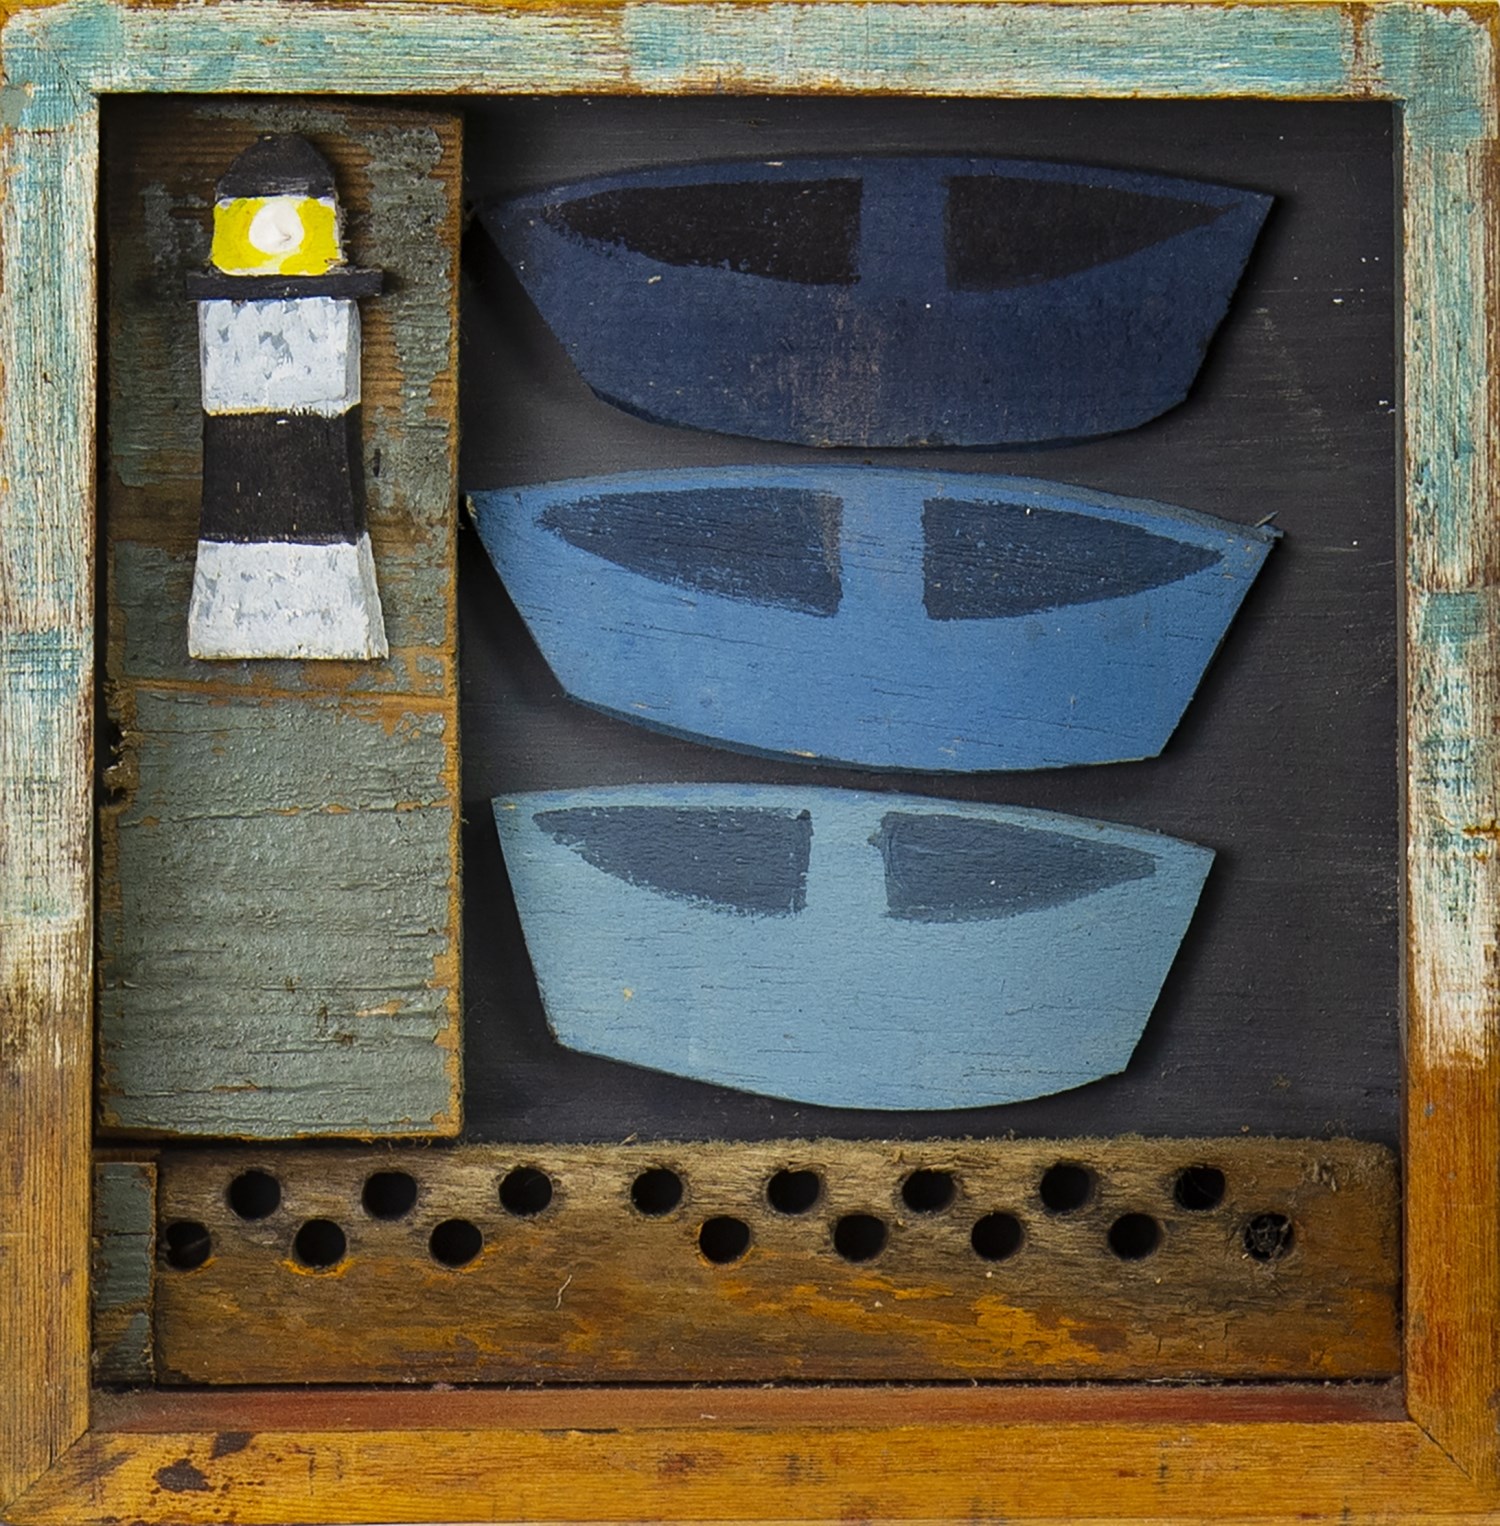 THREE WEE BOATS, A MIXED MEDIA ASSEMBLAGE BY DOROTHY STIRLING